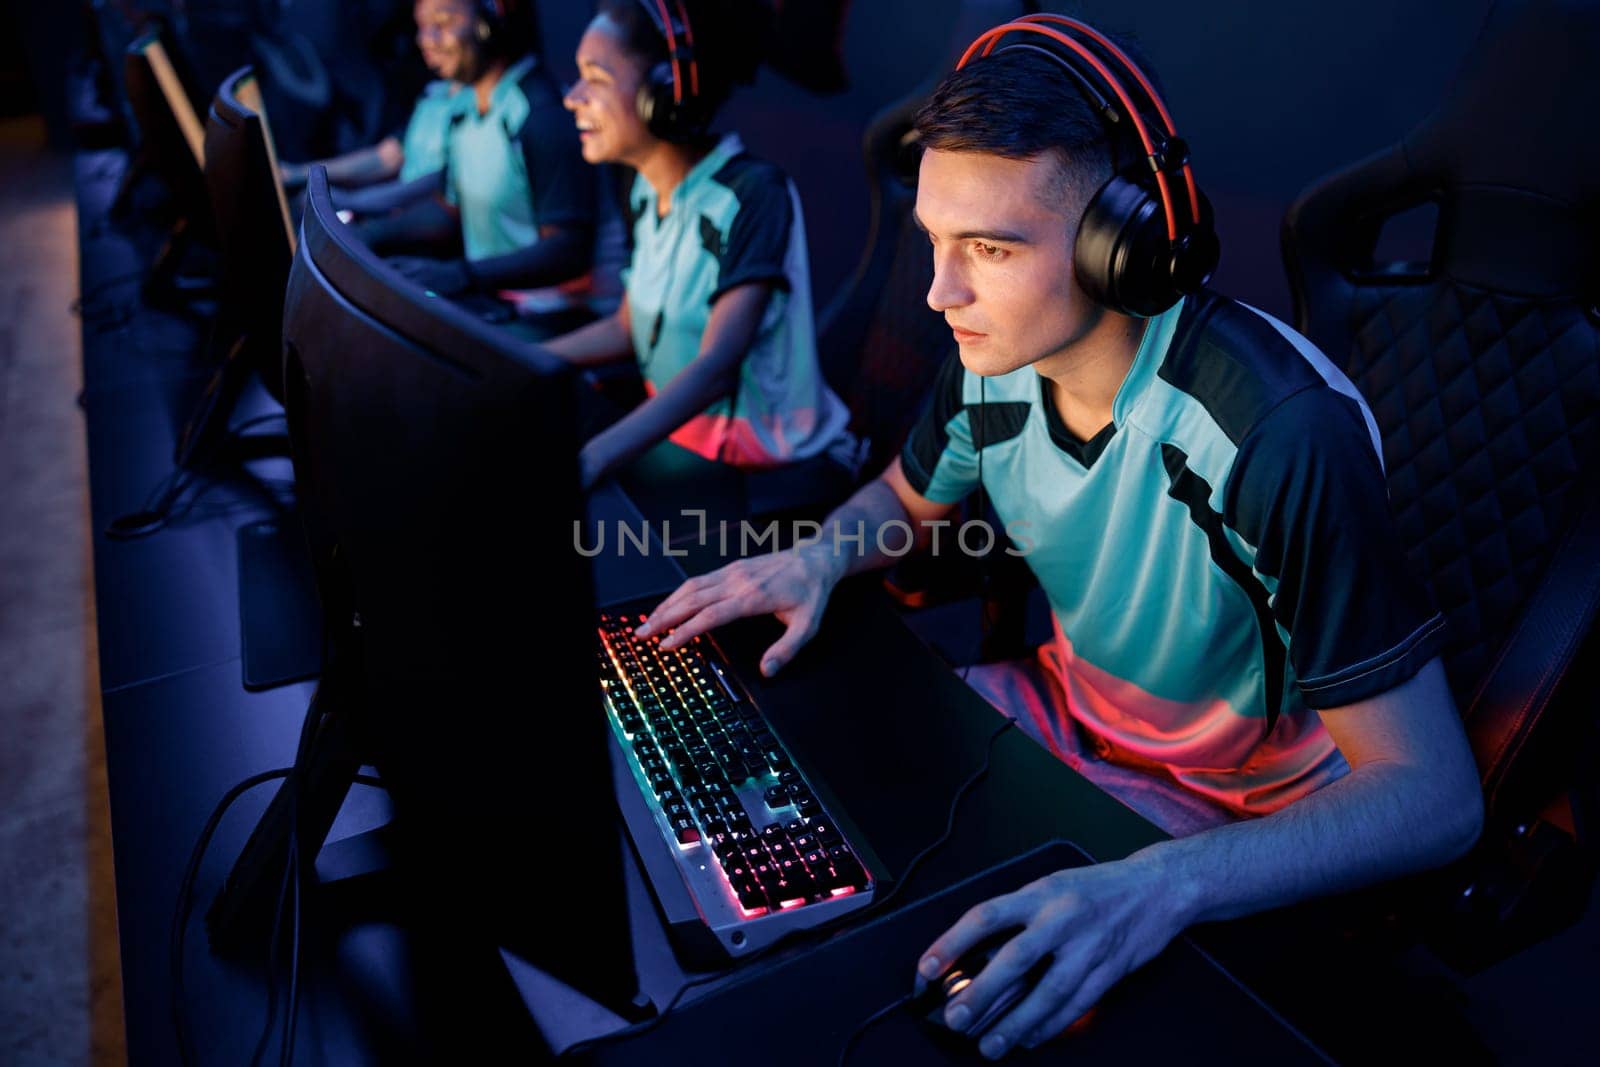 Young esports player concentrated on game wearing wired headset while playing online multiplayer game in cyber club